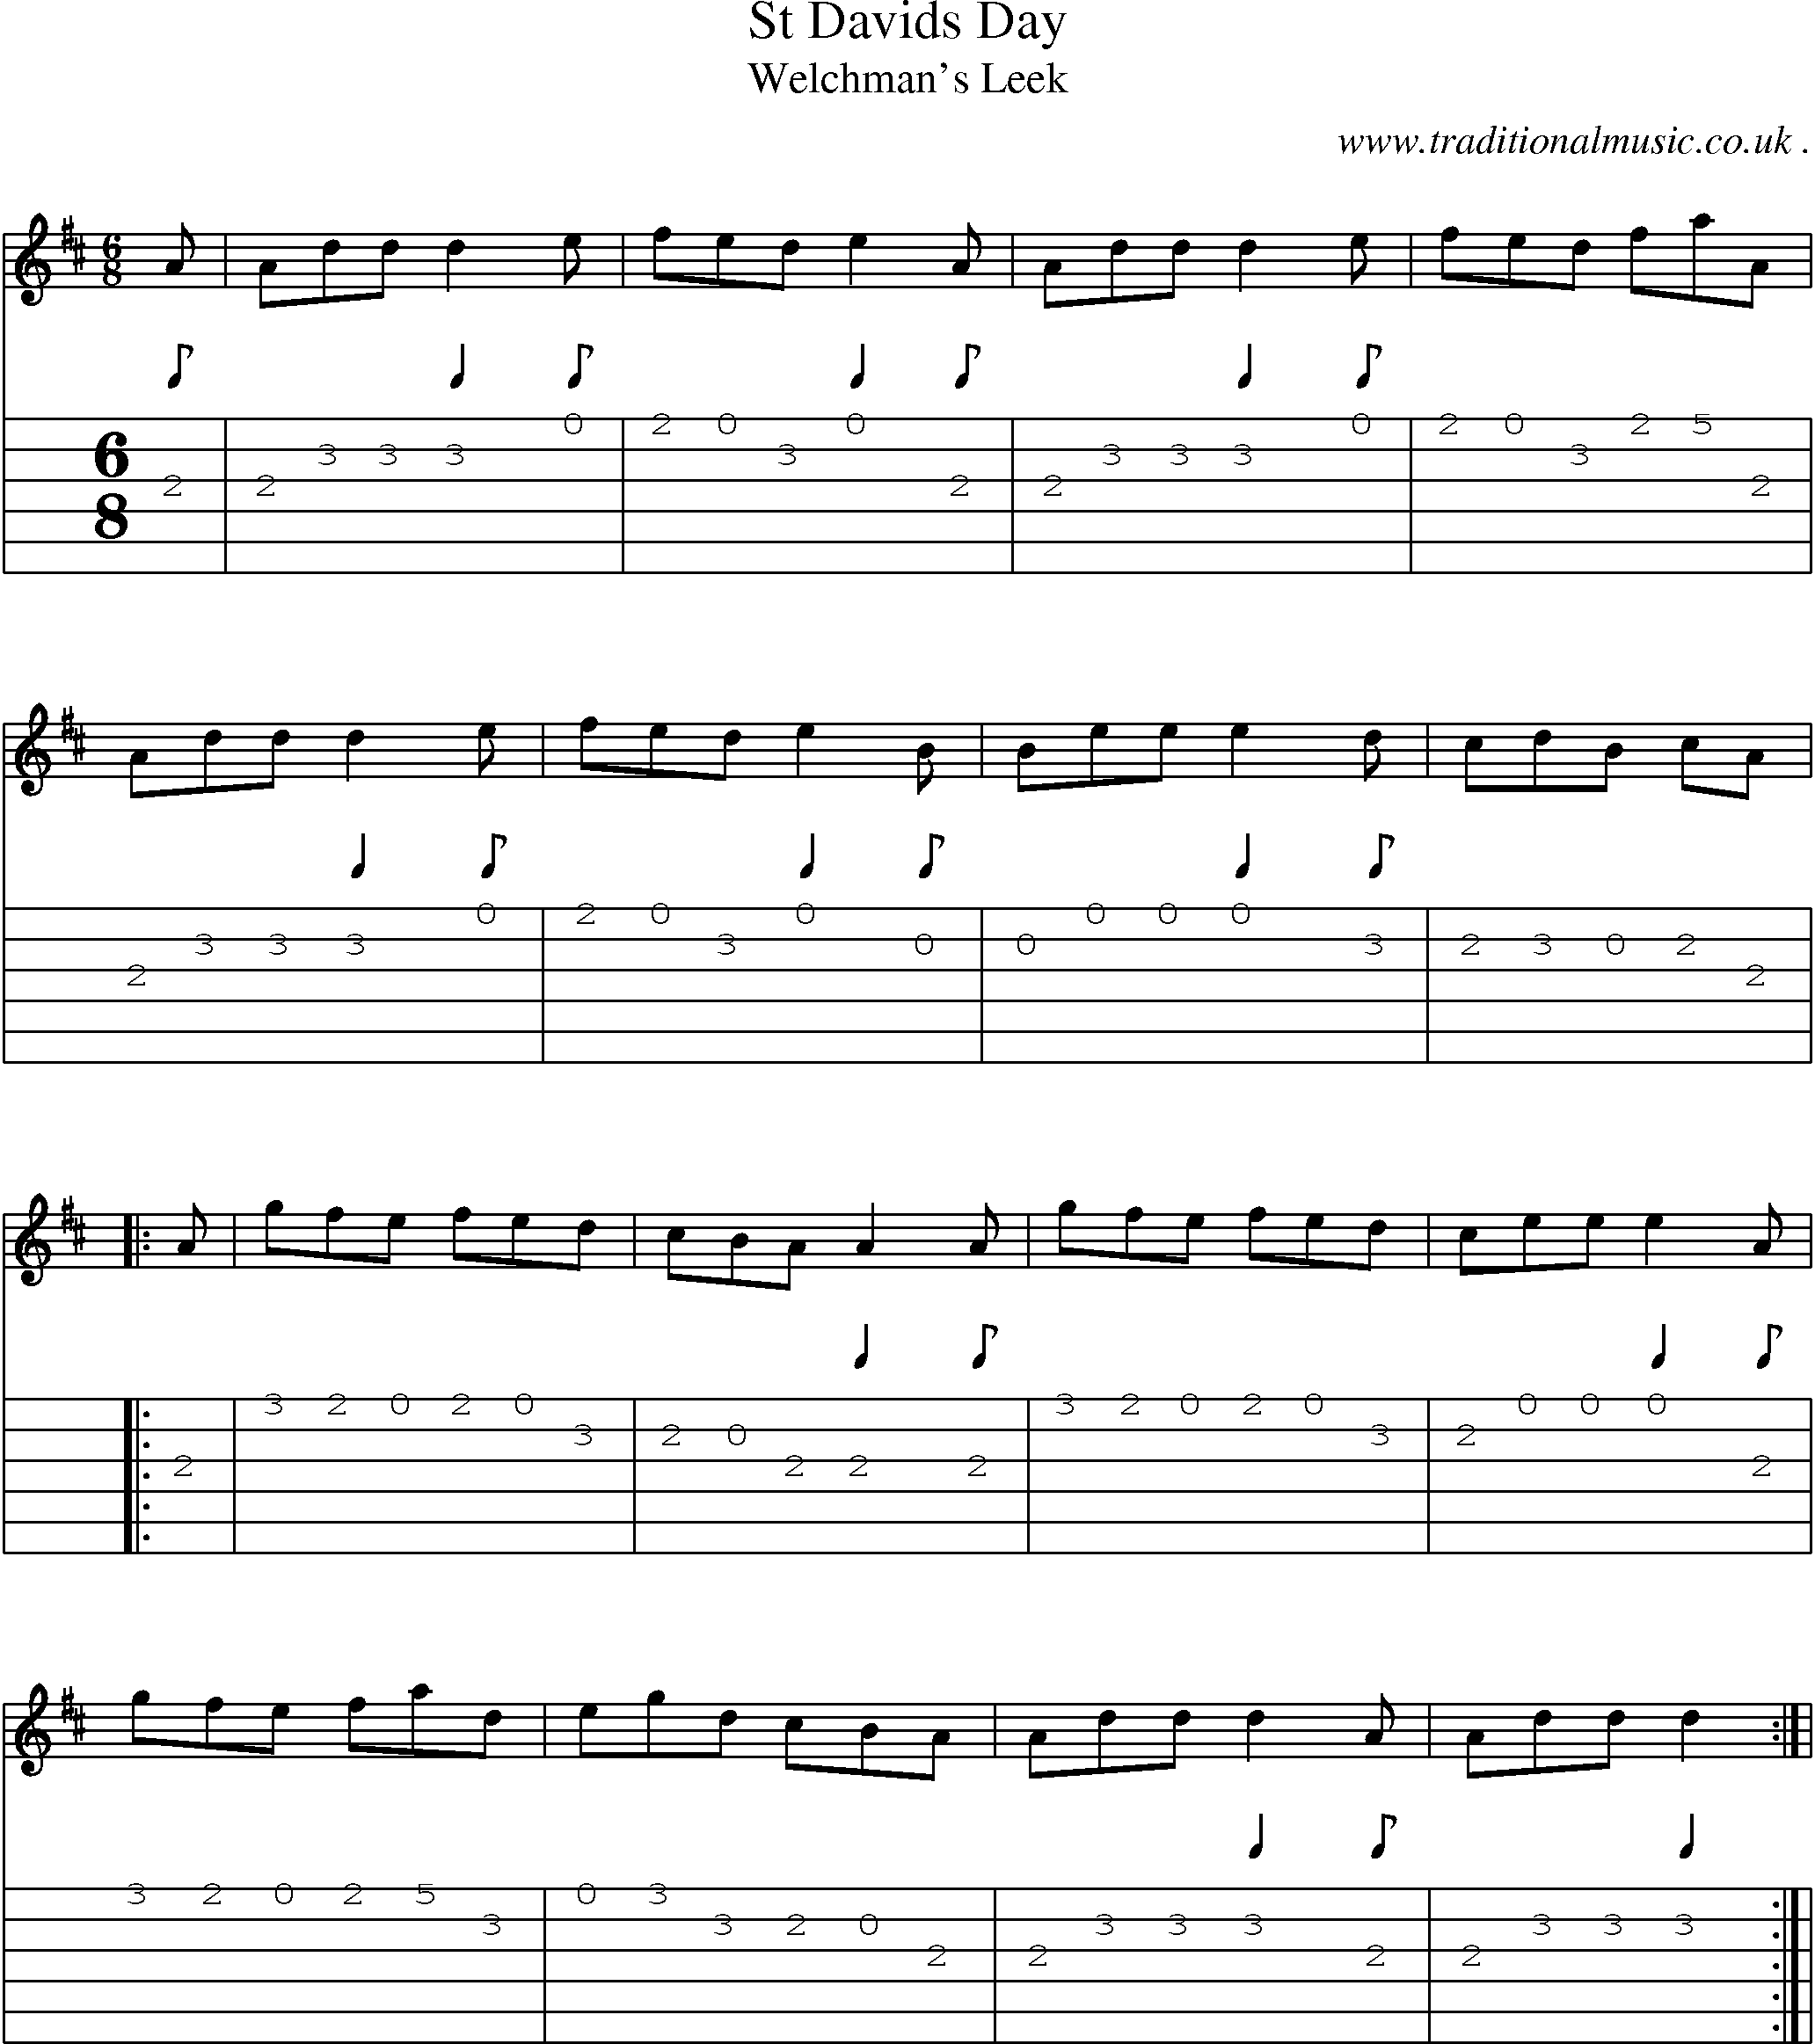 Sheet-Music and Guitar Tabs for St Davids Day